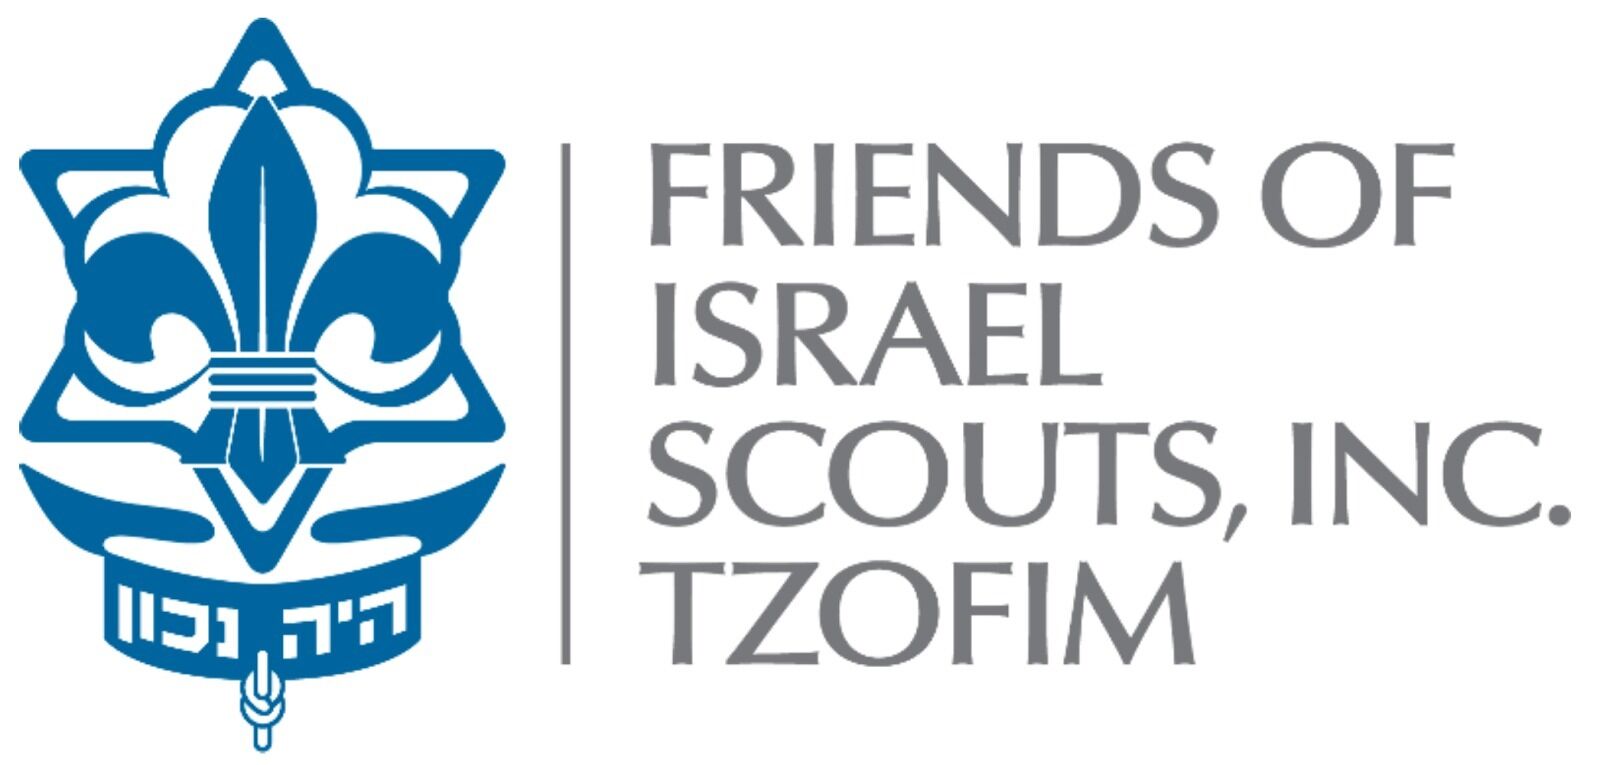 Friends of the Israeli Scouts